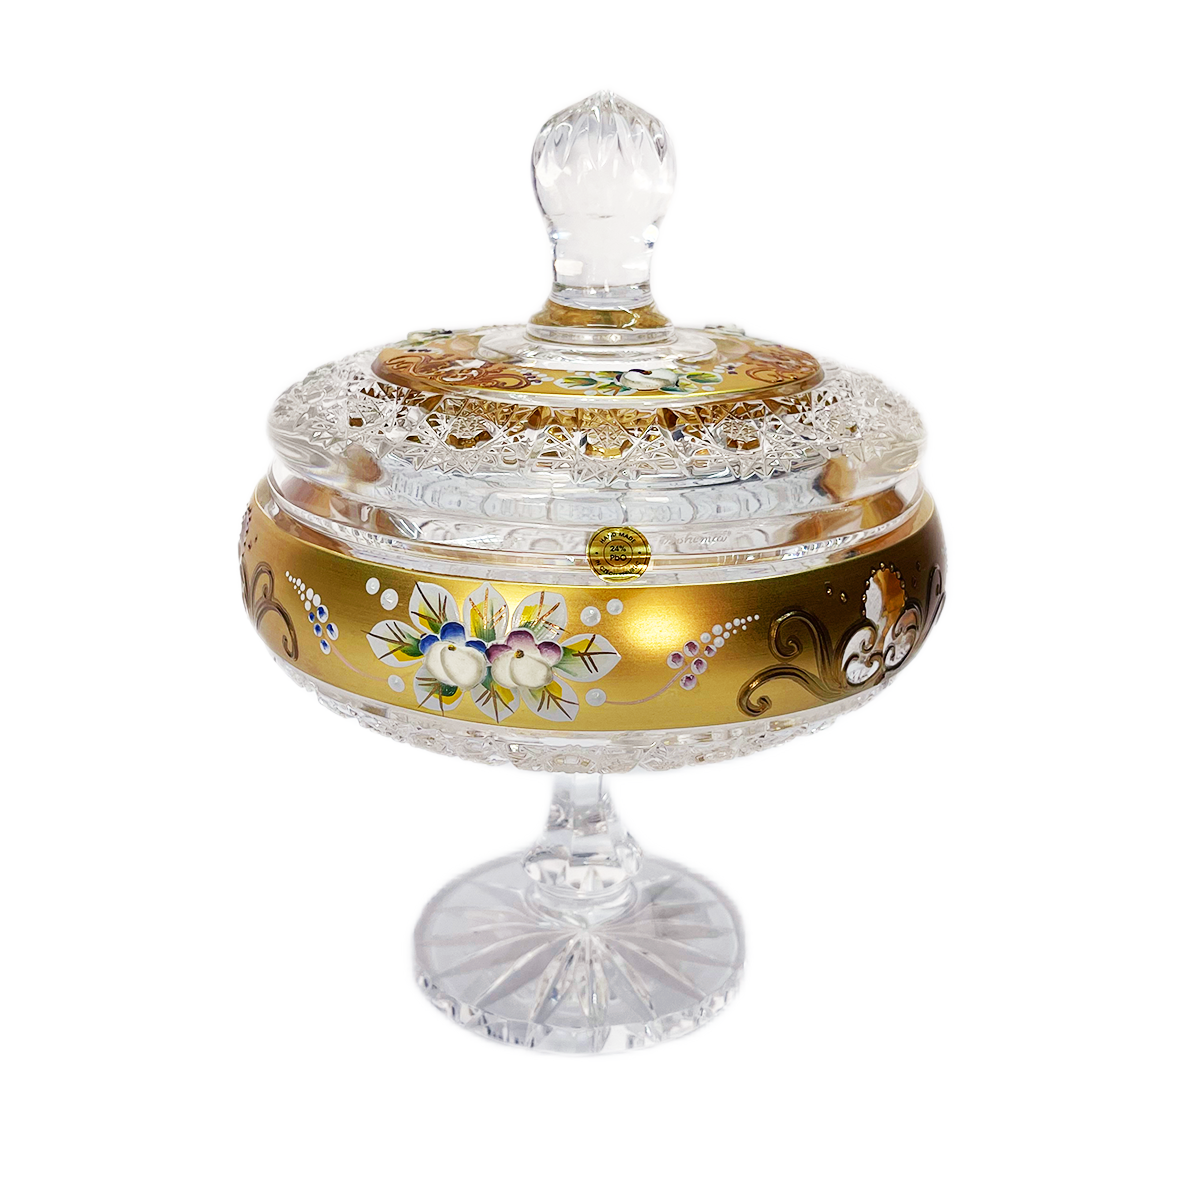 Bohemia Crystal Bonbonniere with Cover and Base -Hand Cut -16.5 cm -Gold